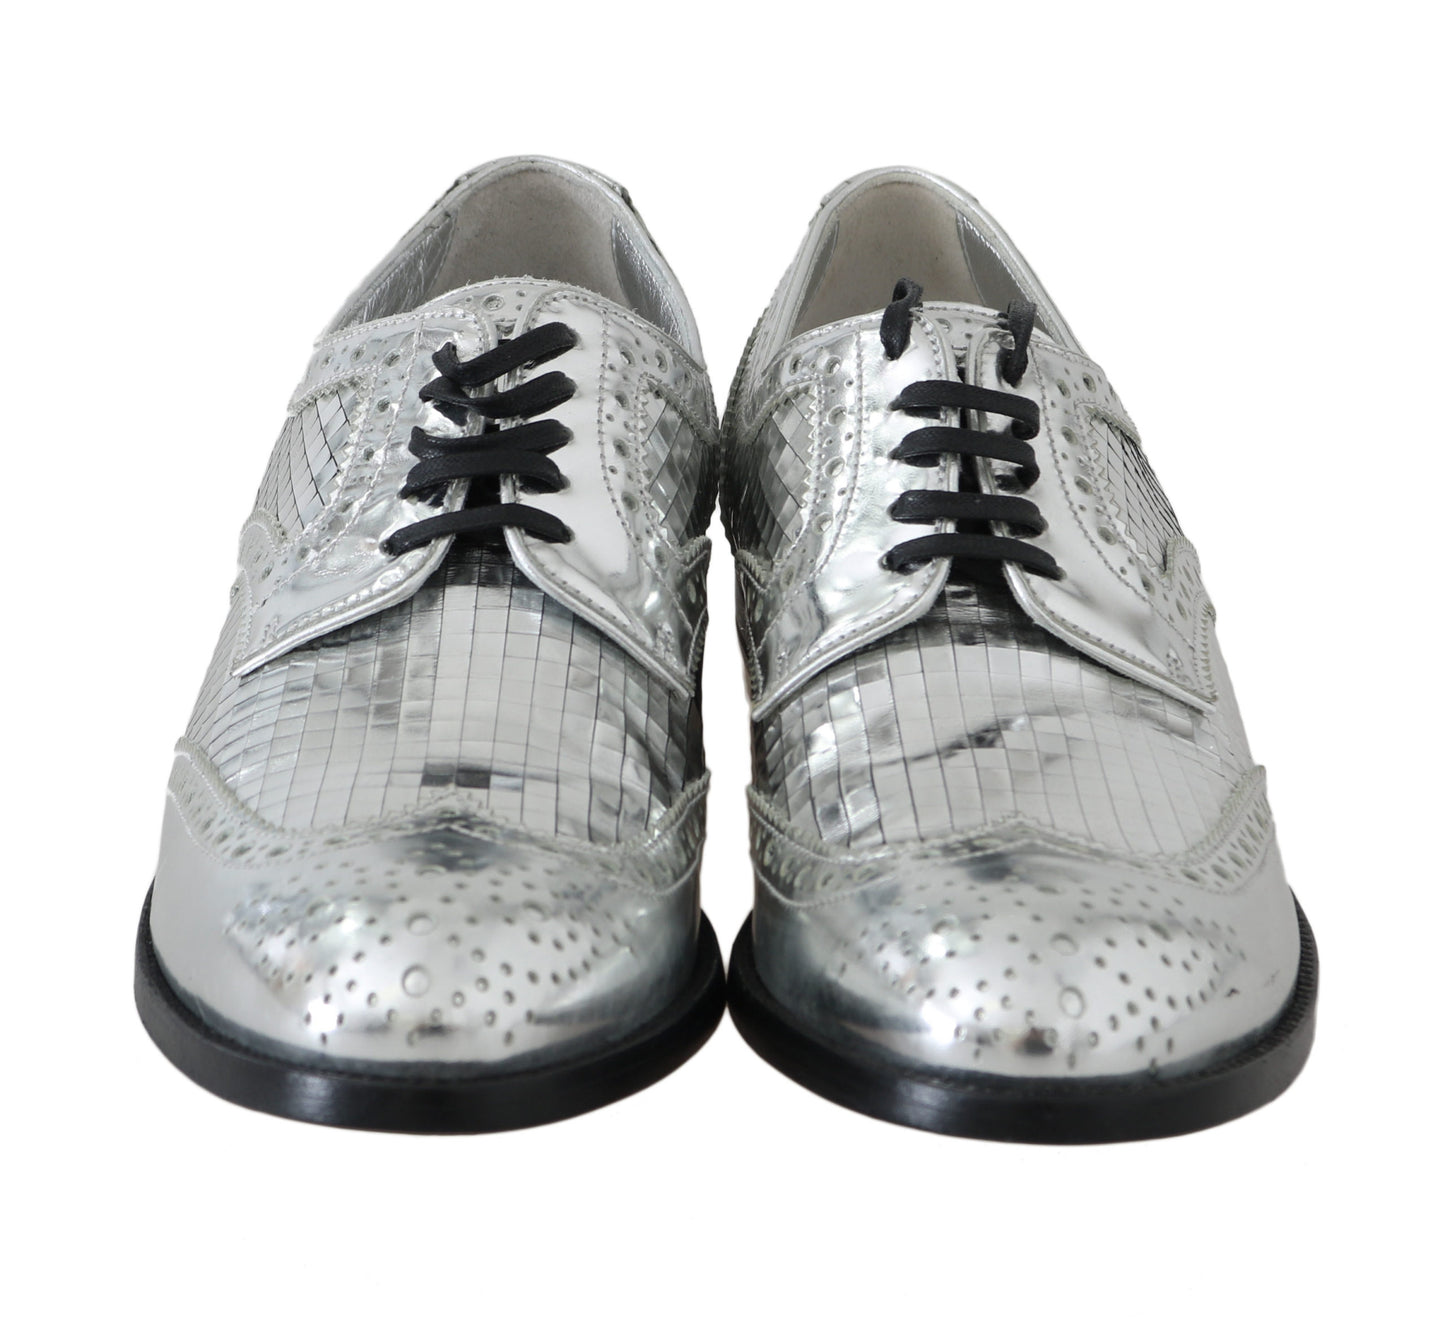 Silver Leather Mirrored Shiny Brogues